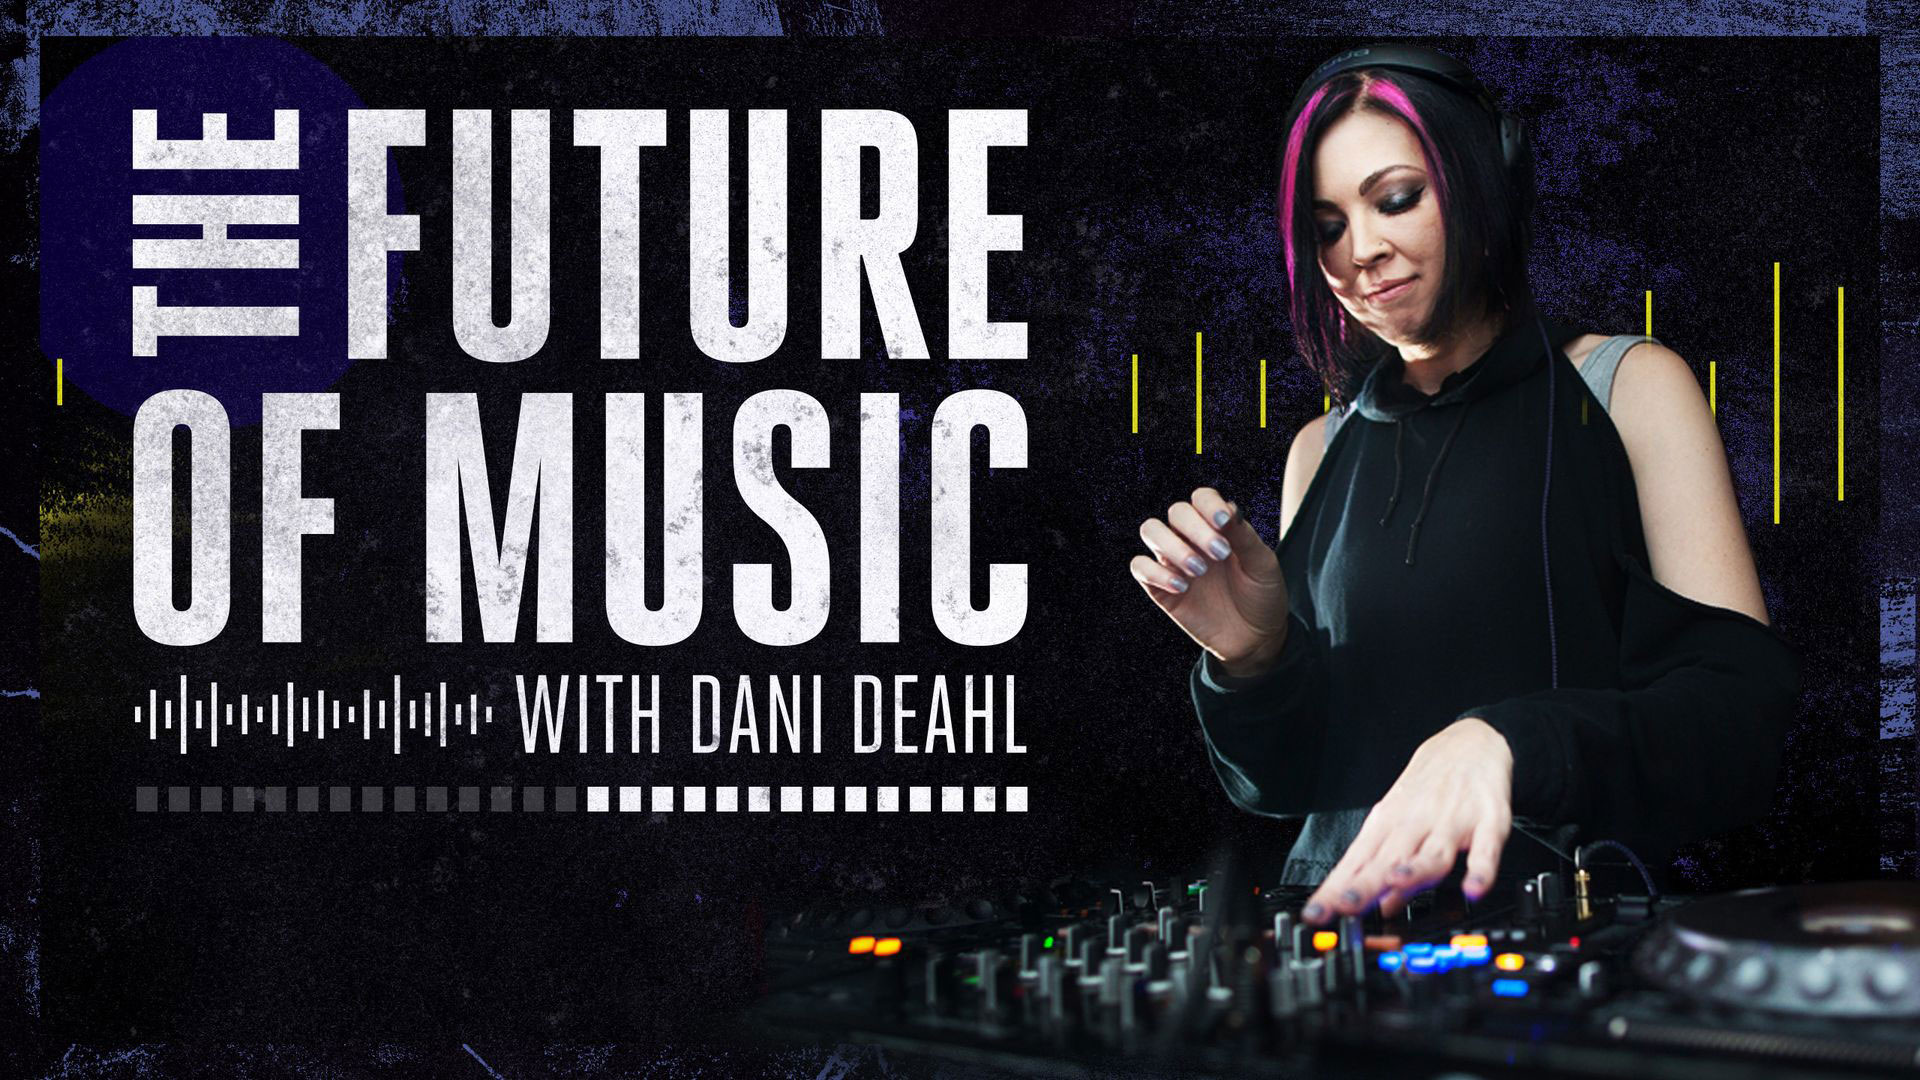 The Future of Music by Dani Deahl